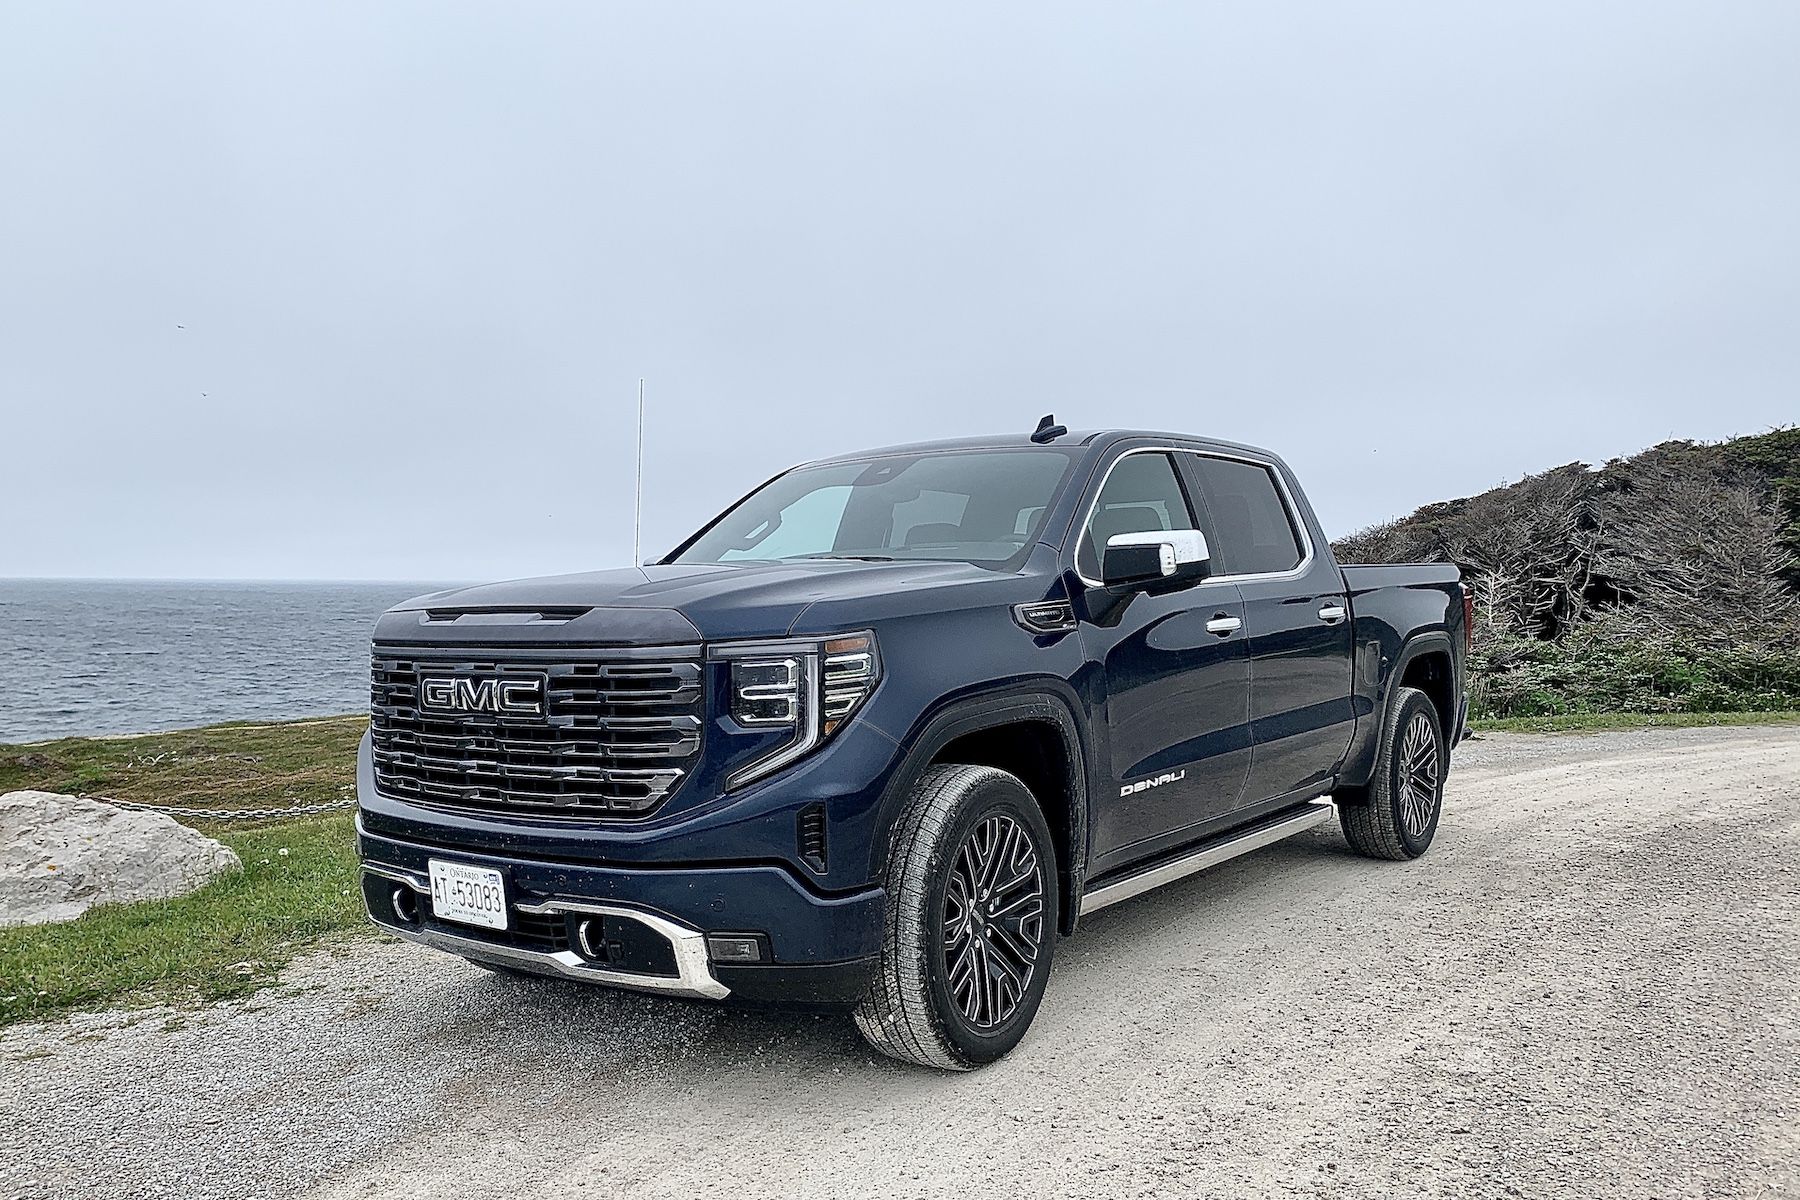 Using Super Cruise on the 2022 GMC Sierra Denali Ultimate Driving